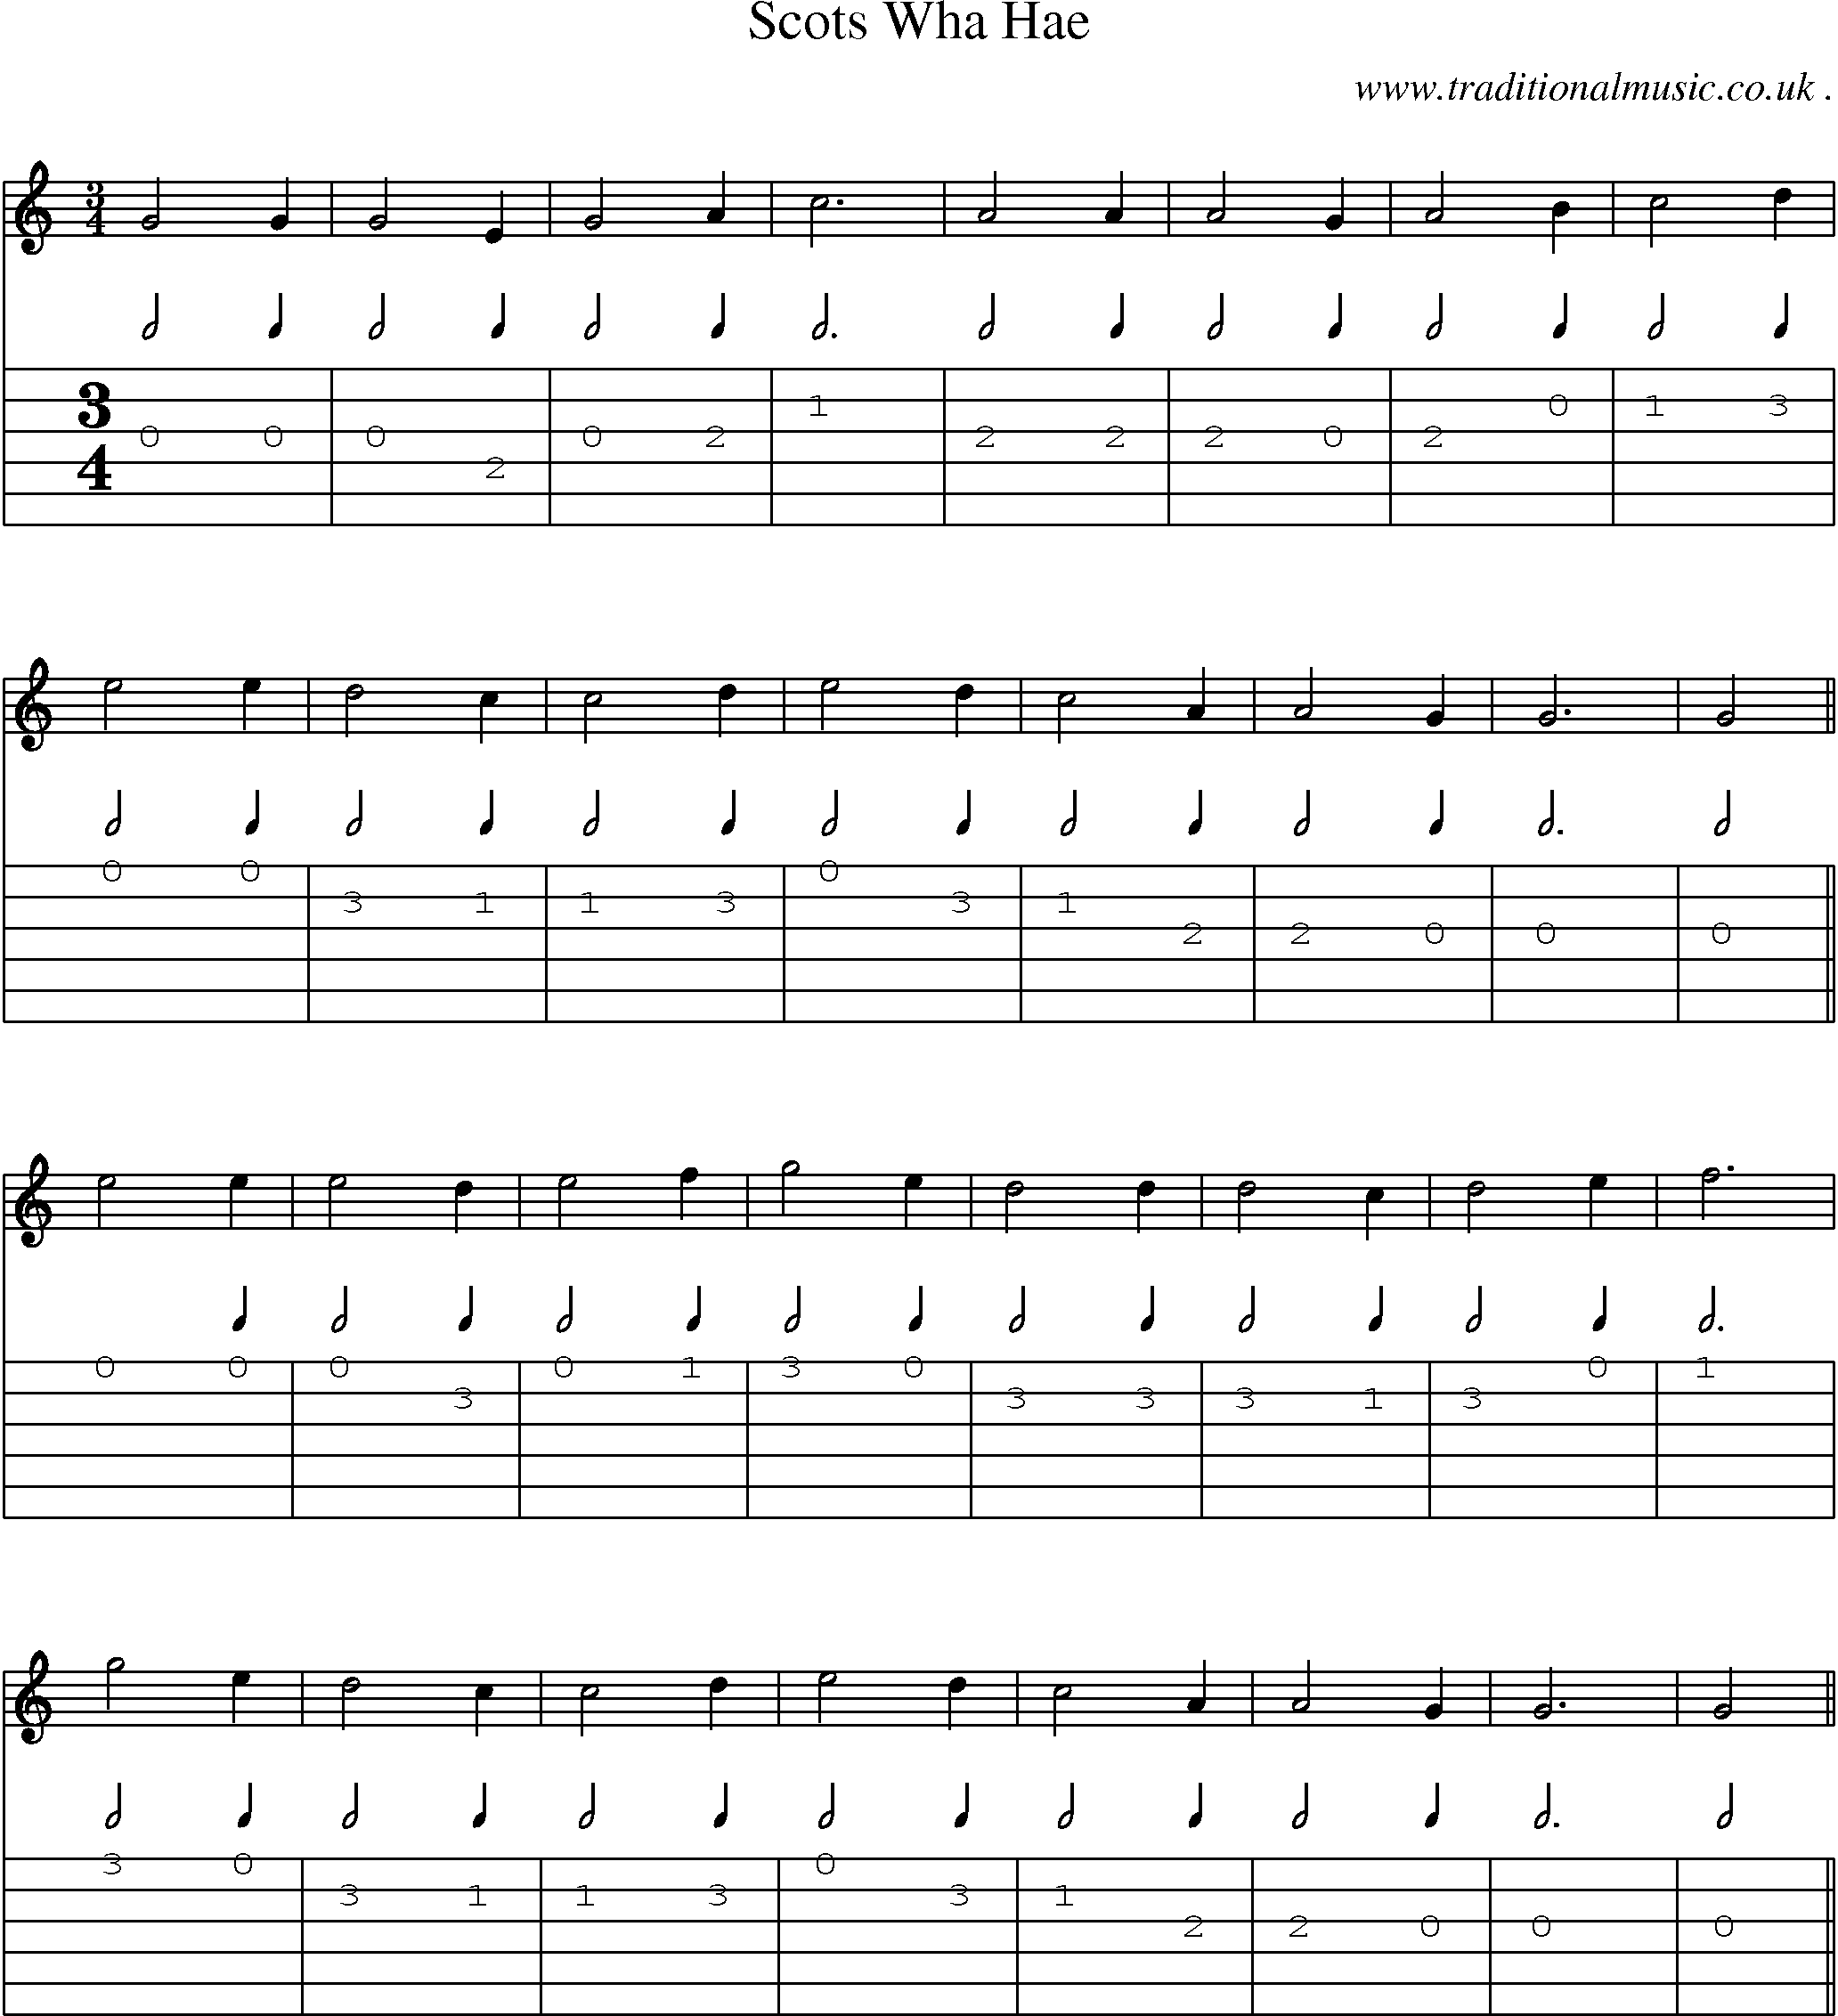 Sheet-music  score, Chords and Guitar Tabs for Scots Wha Hae